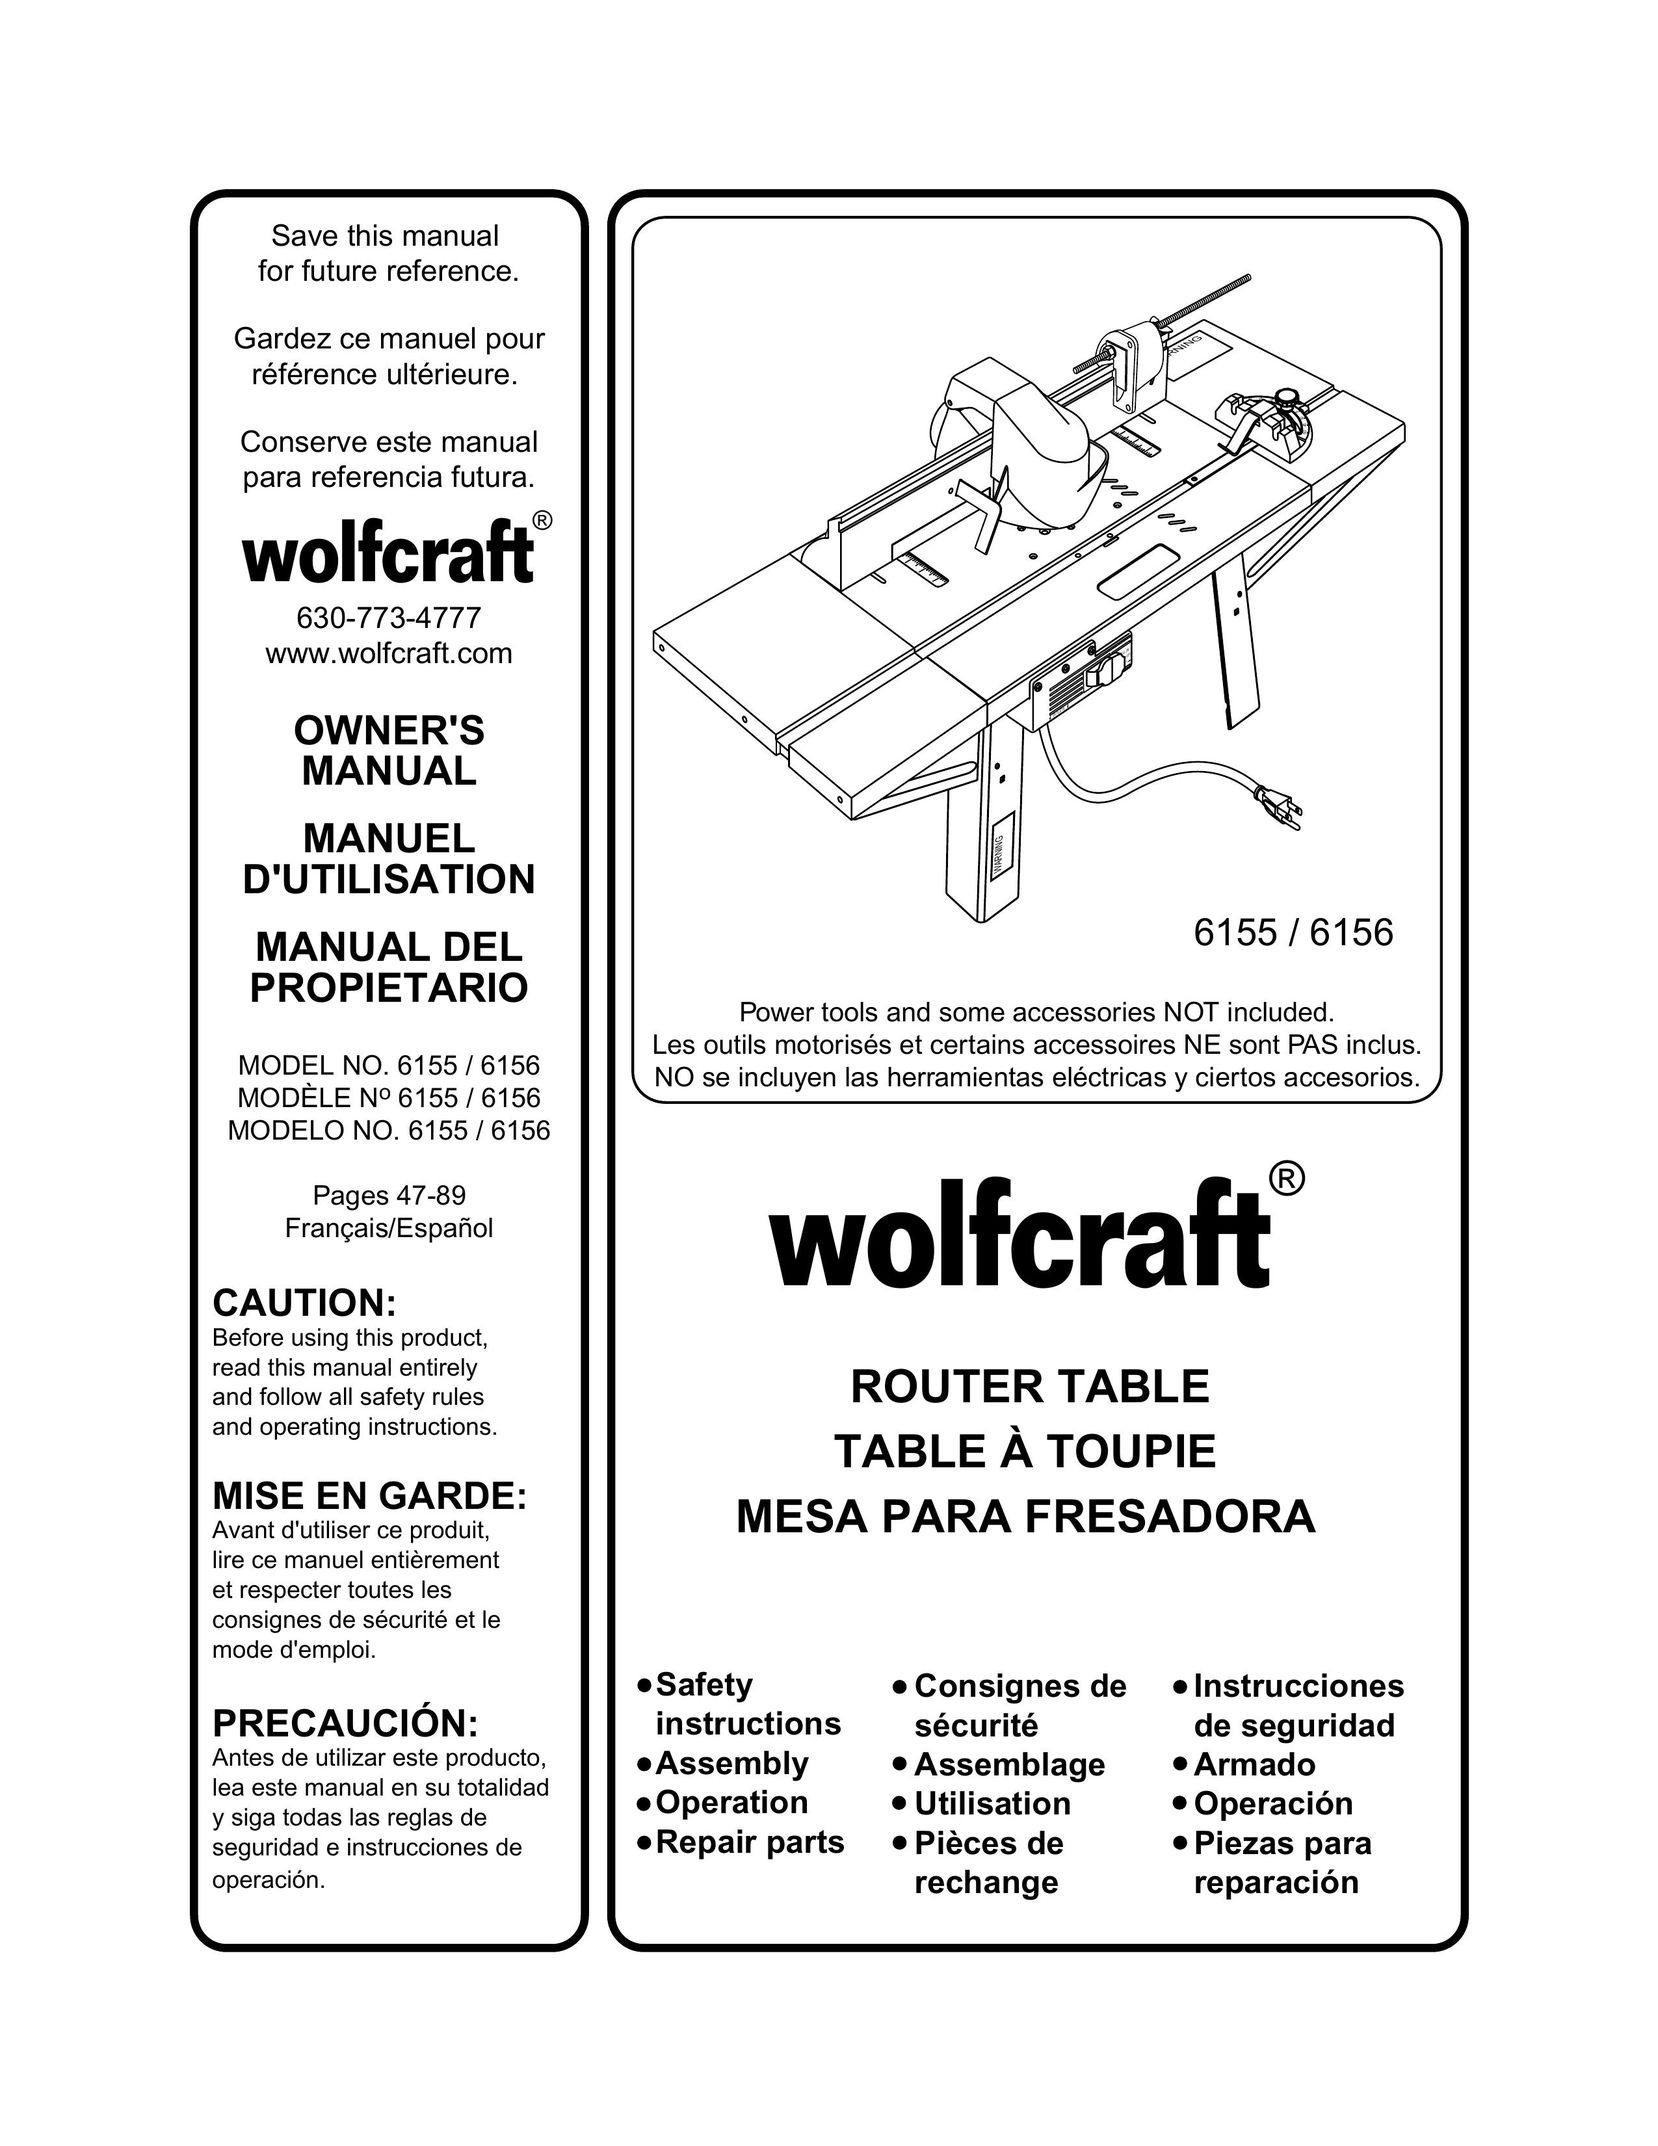 Wolfcraft 6155 Router User Manual